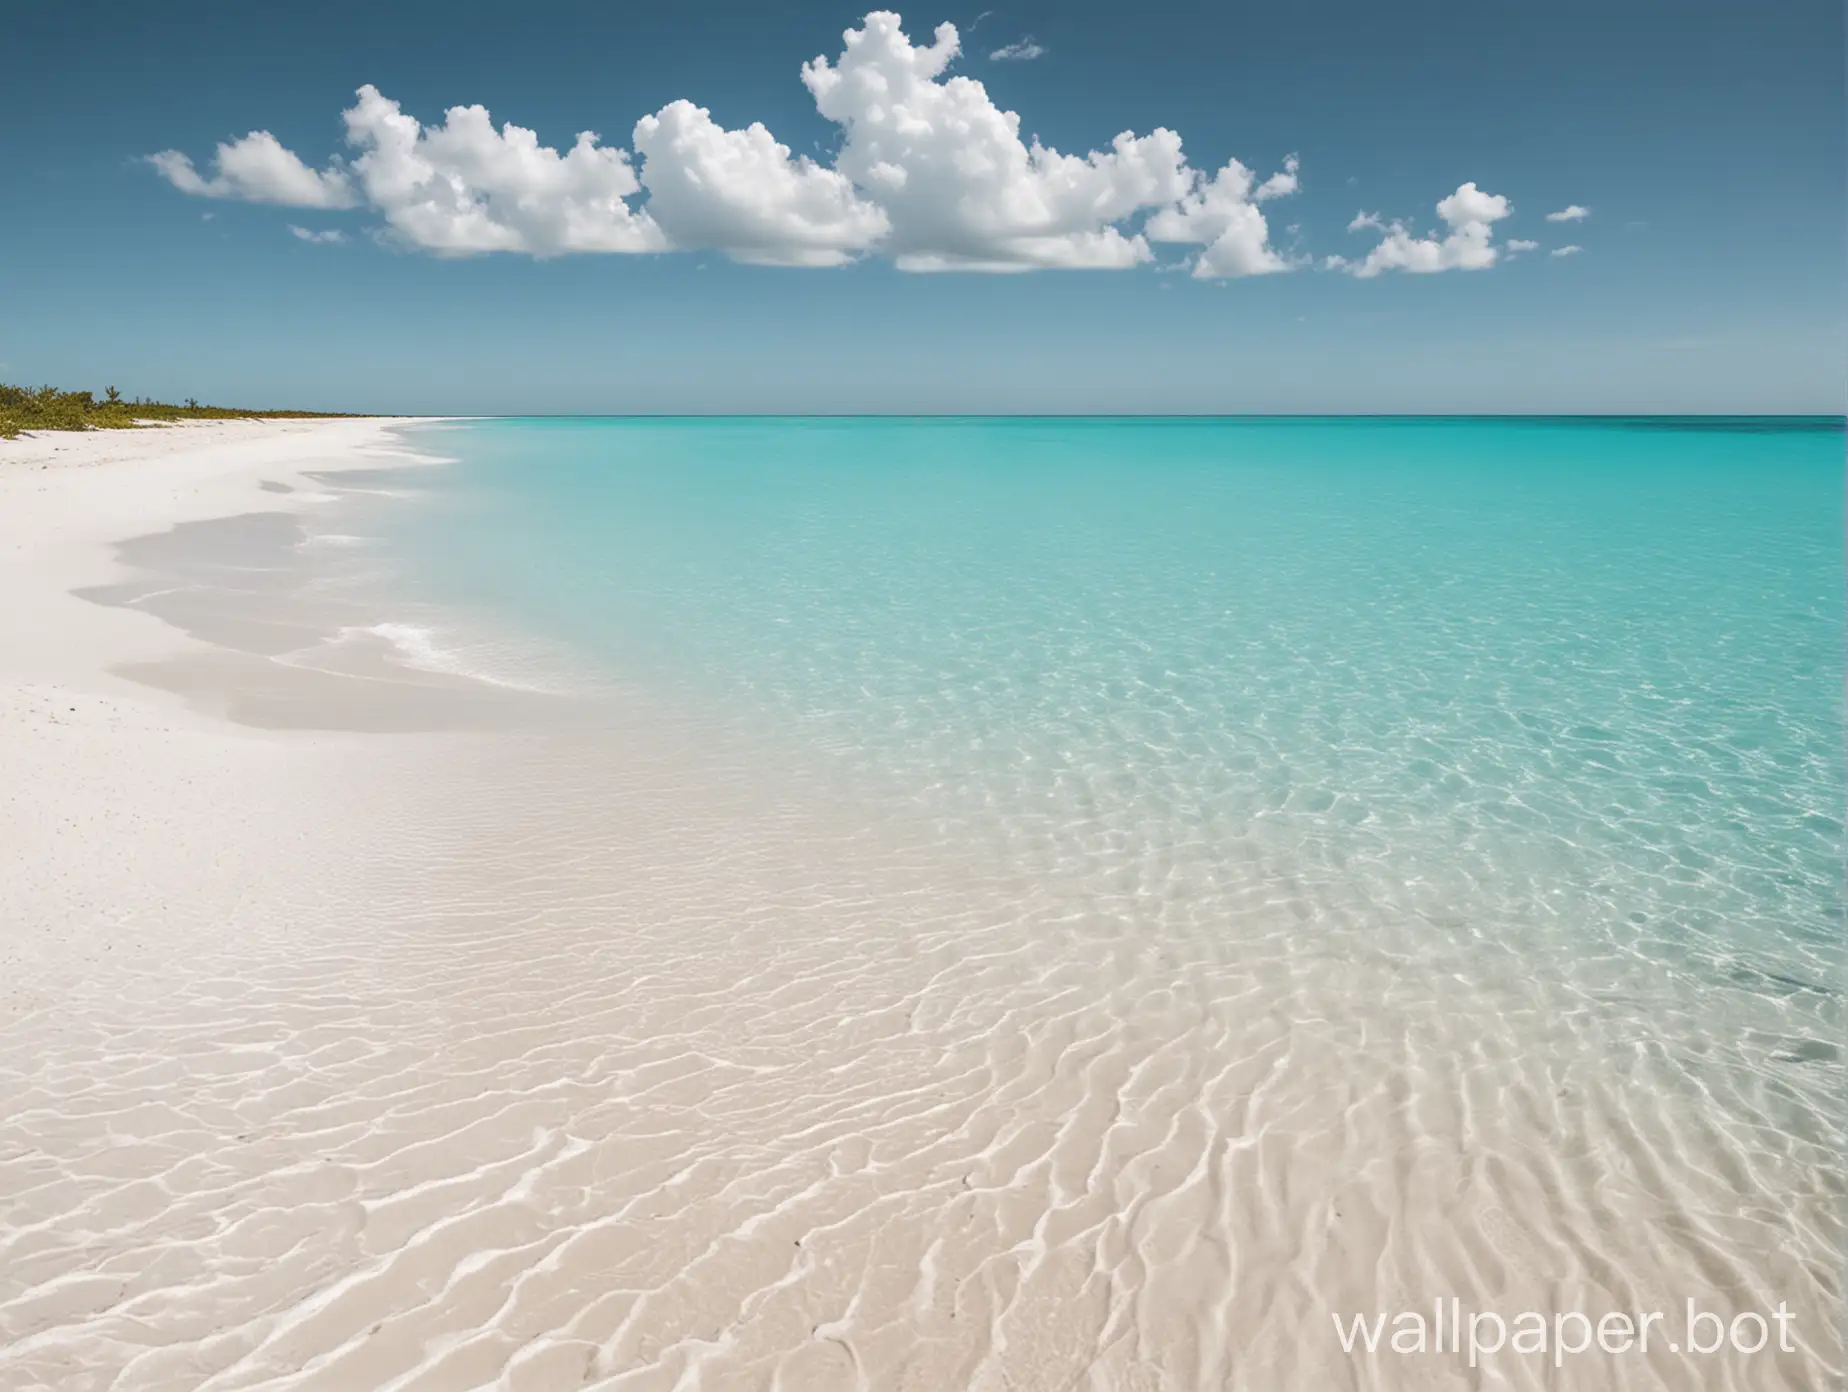 Tranquil-Tropical-Paradise-White-Sandy-Beach-and-Turquoise-Waters-under-a-Blue-Sunny-Sky